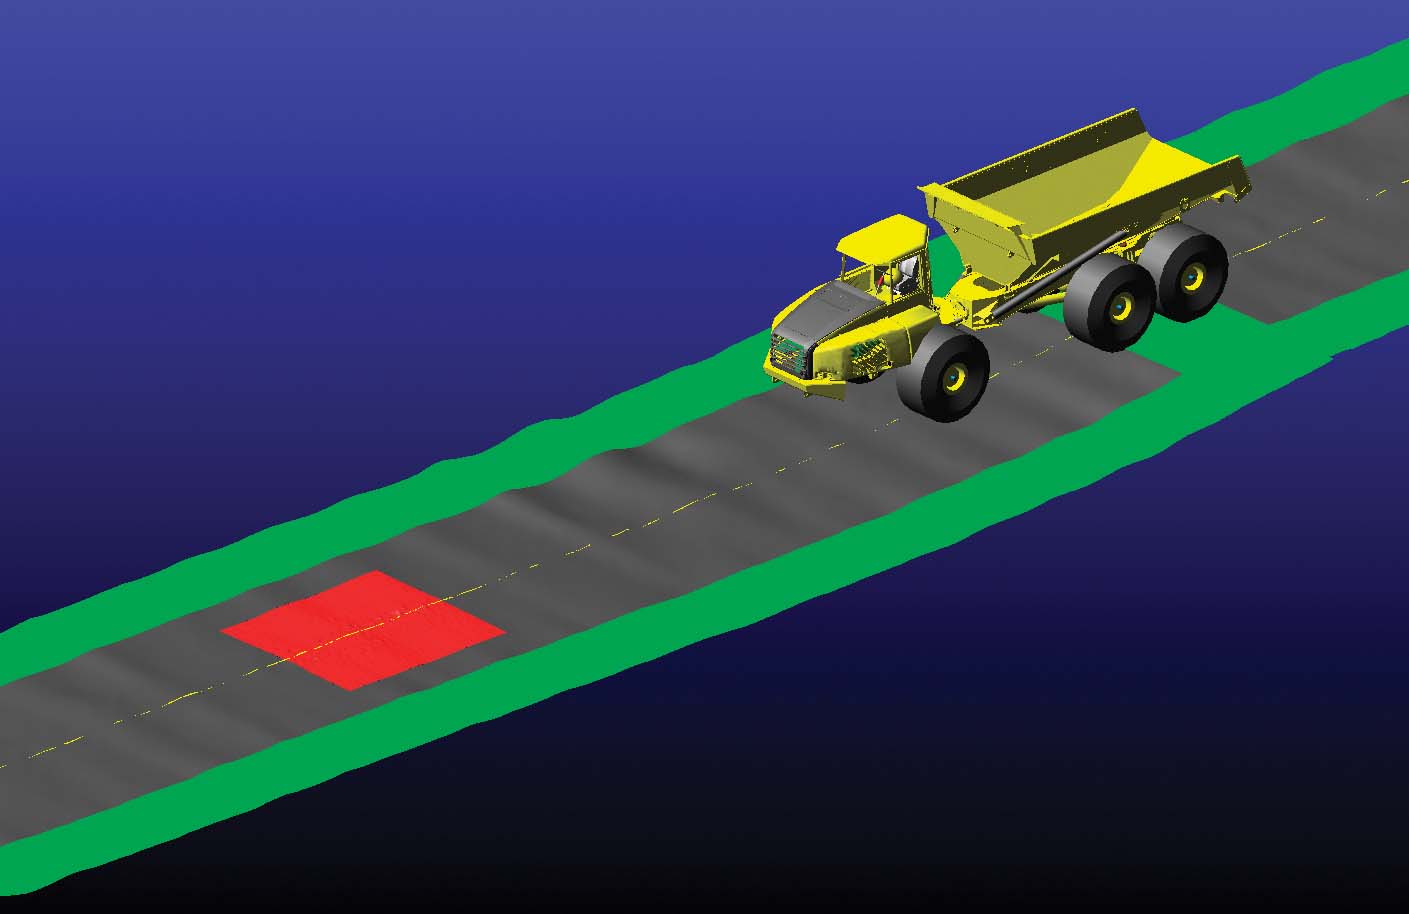 A40 articulated hauler running on a virtual test track